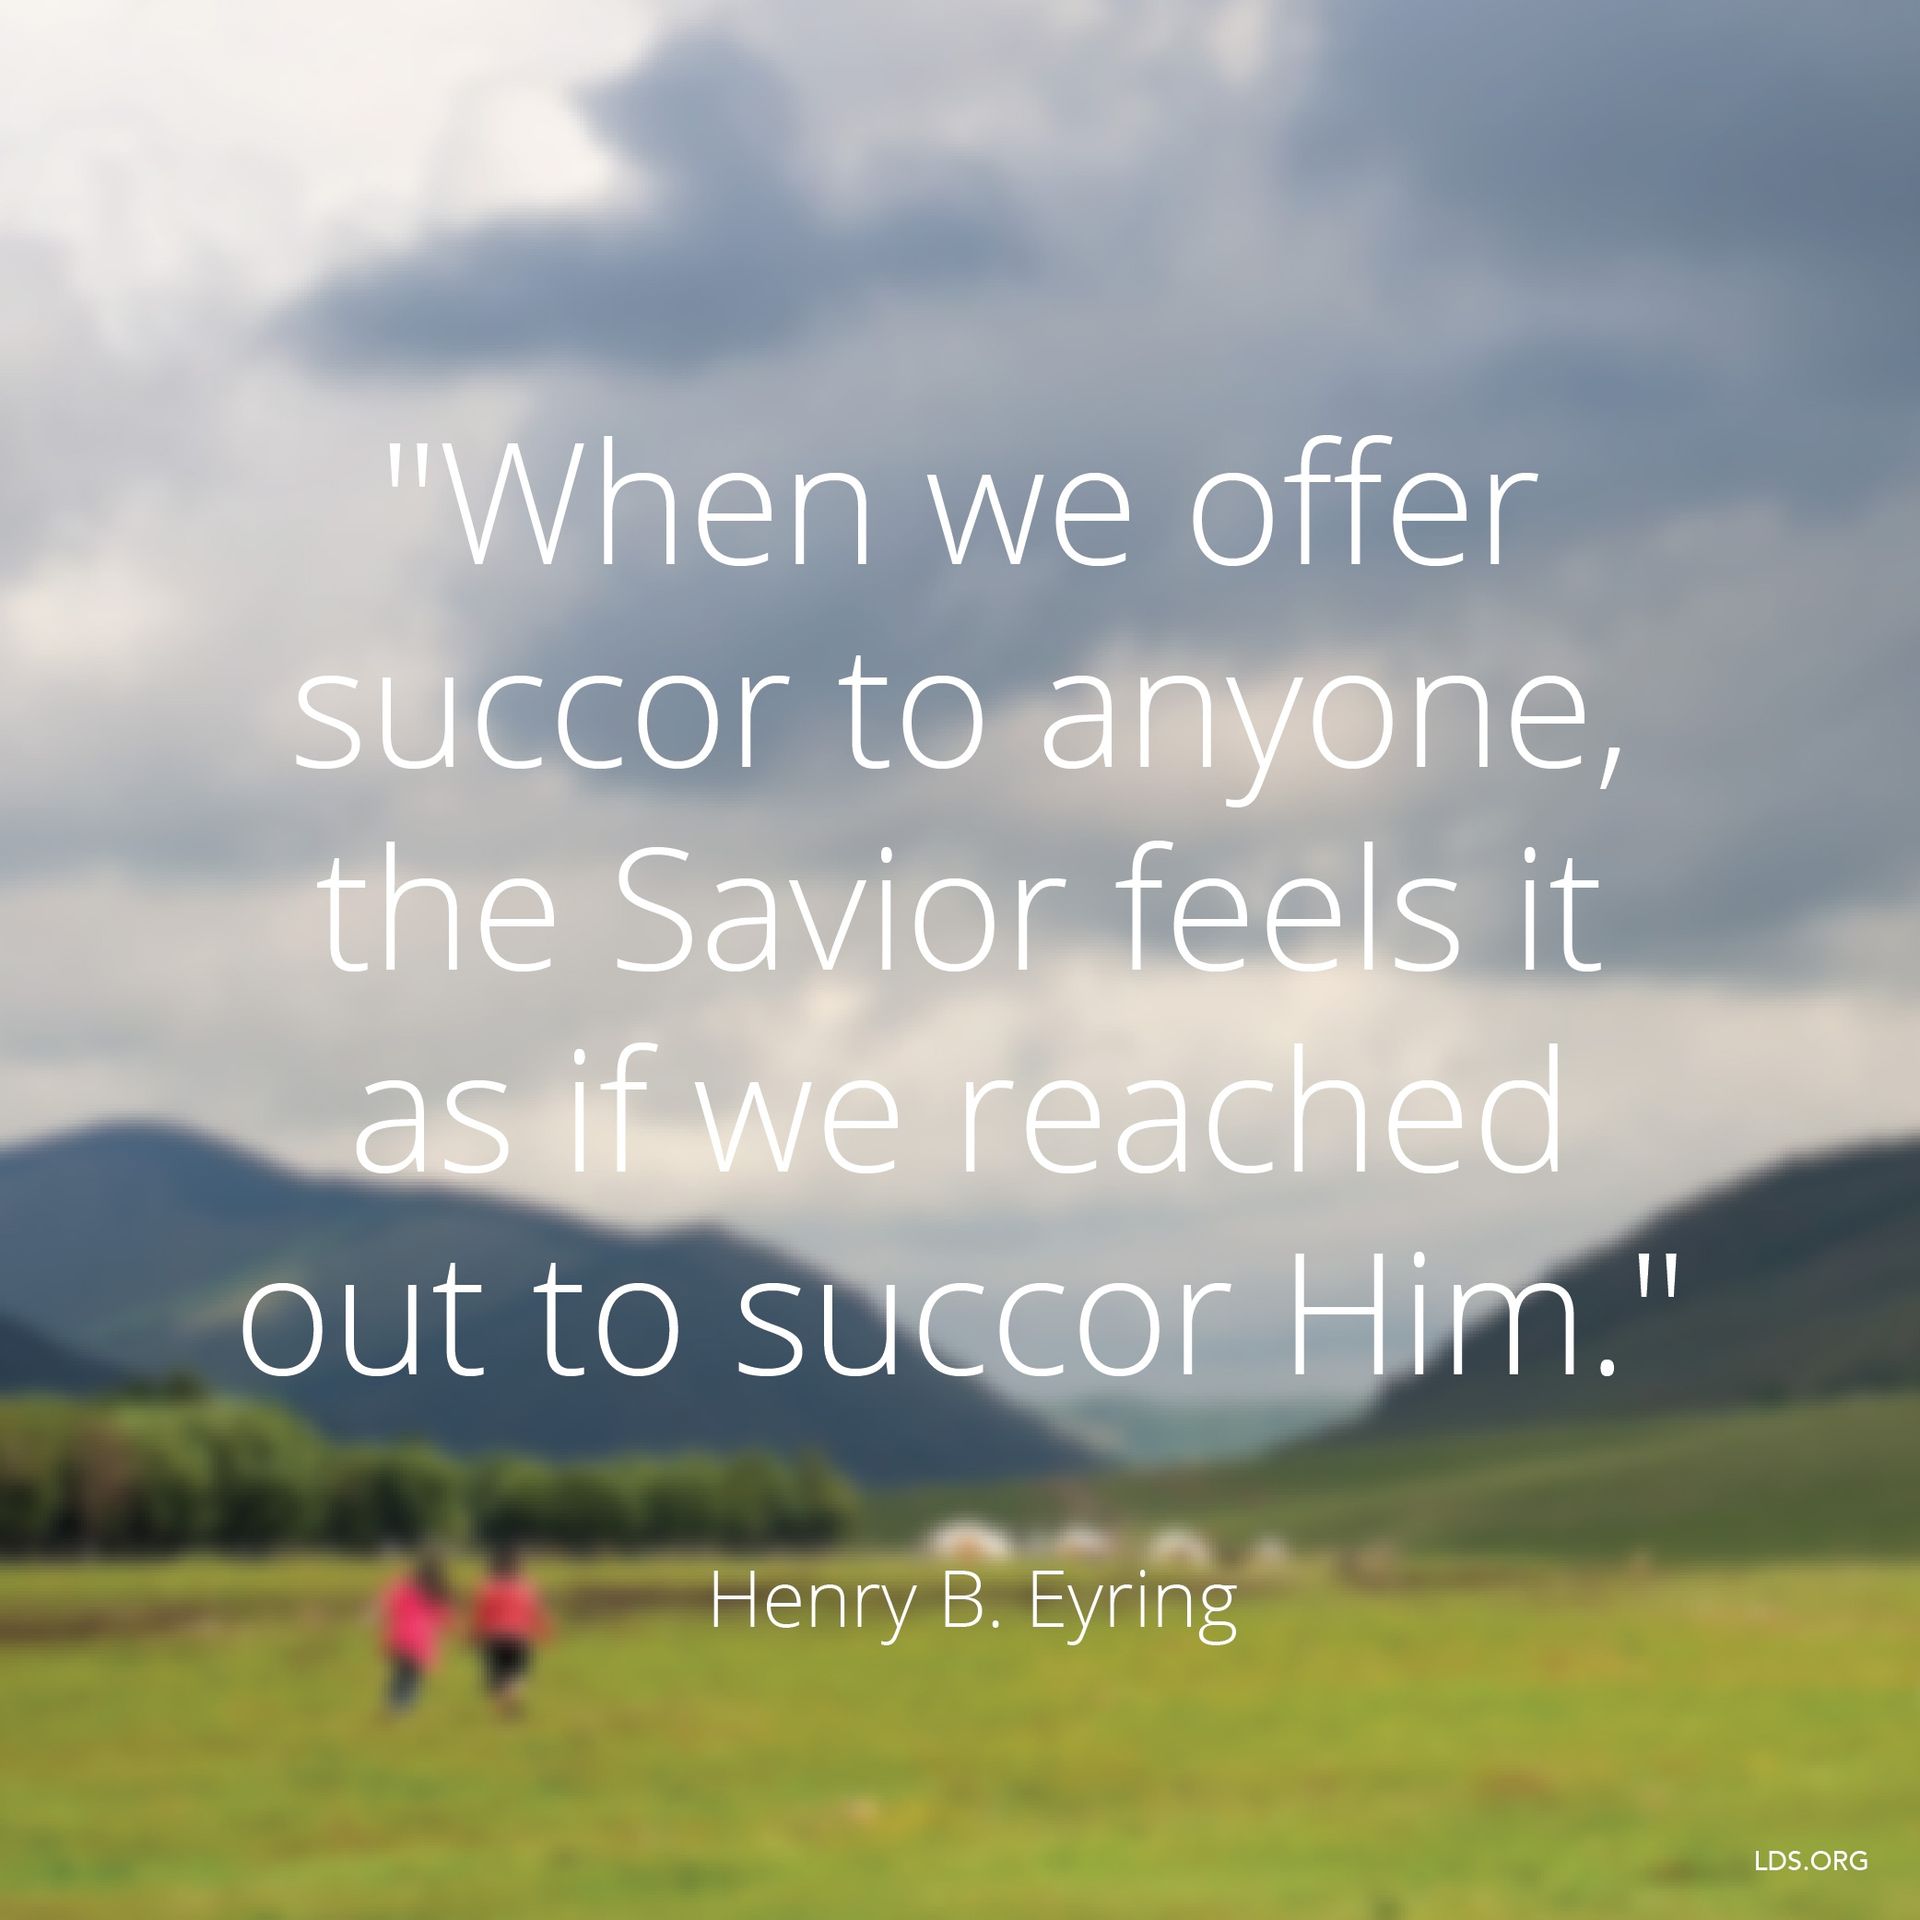 “When we offer succor to anyone, the Savior feels it as if we reached out to succor Him.”—President Henry B. Eyring, “‘Is Not This the Fast That I Have Chosen?’” © undefined ipCode 1.